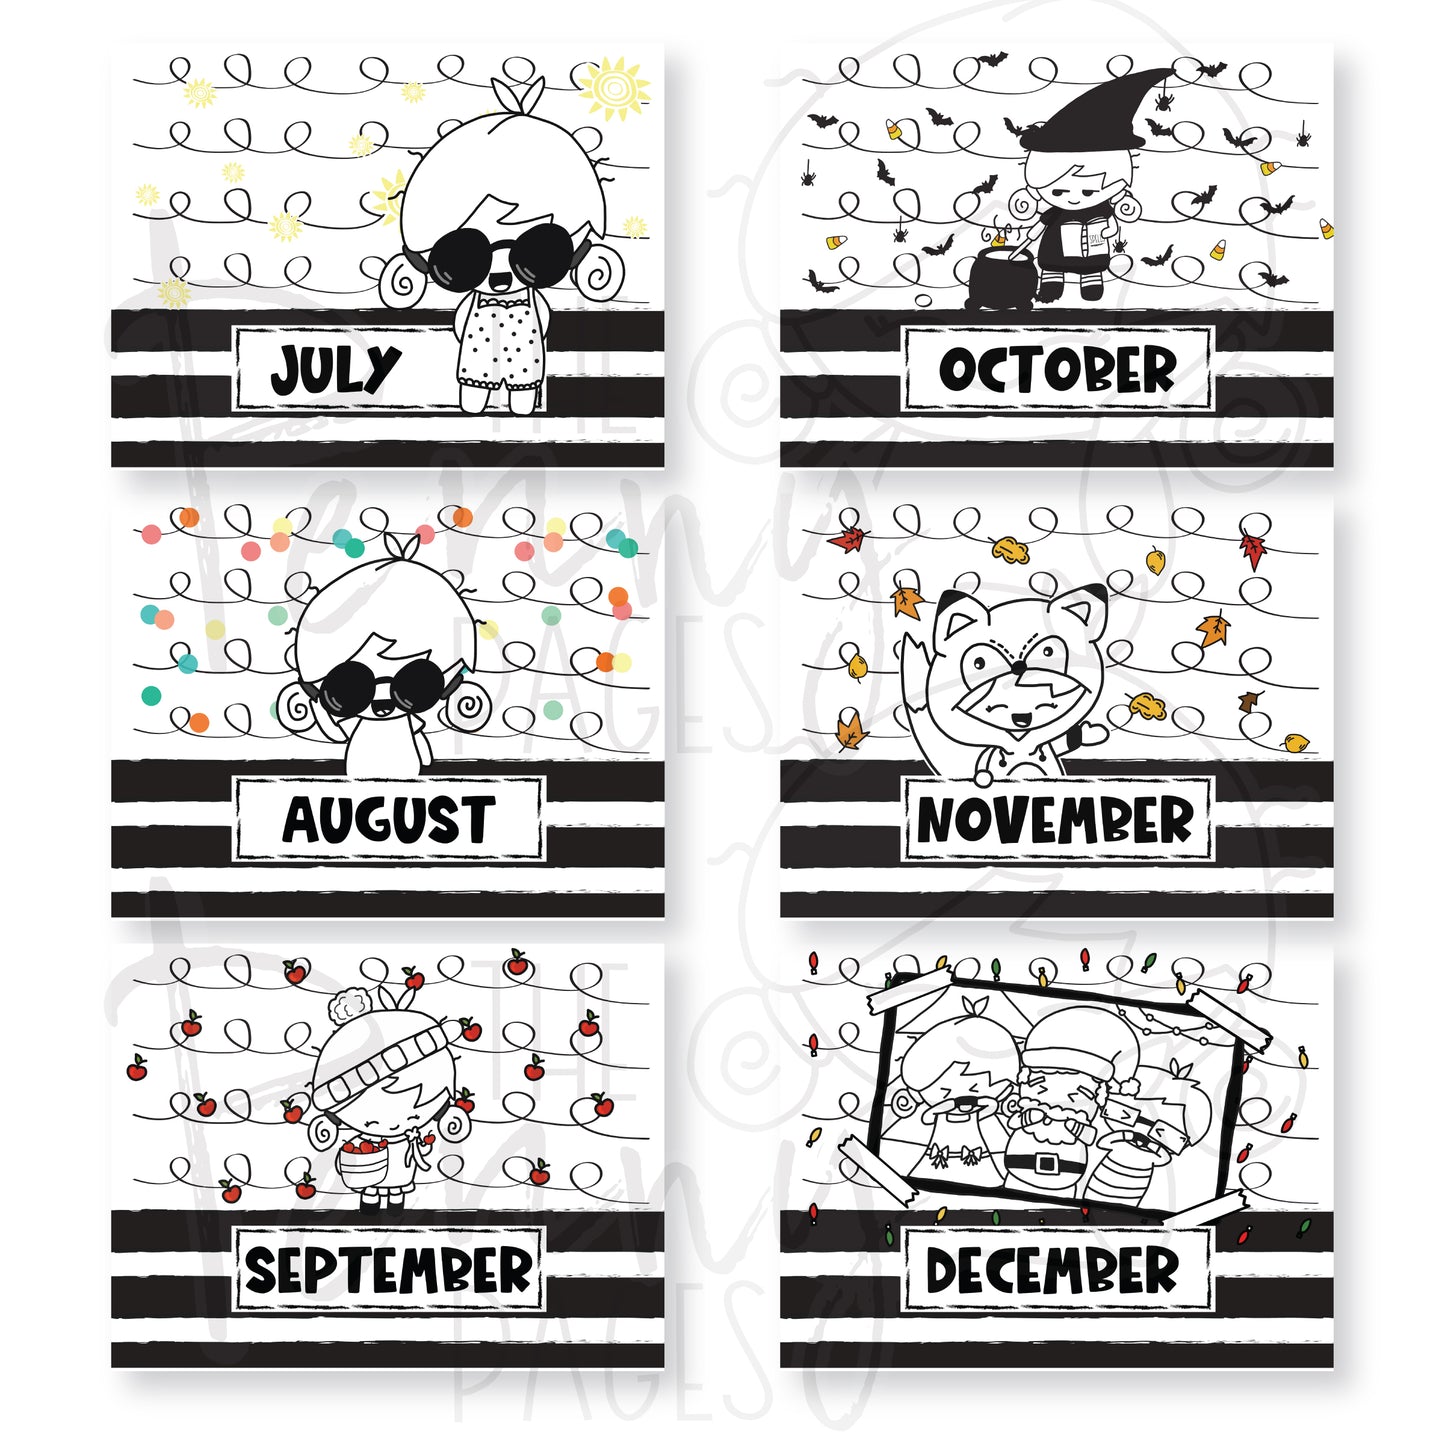 2023 Wall Calendars - 2 styles to choose from